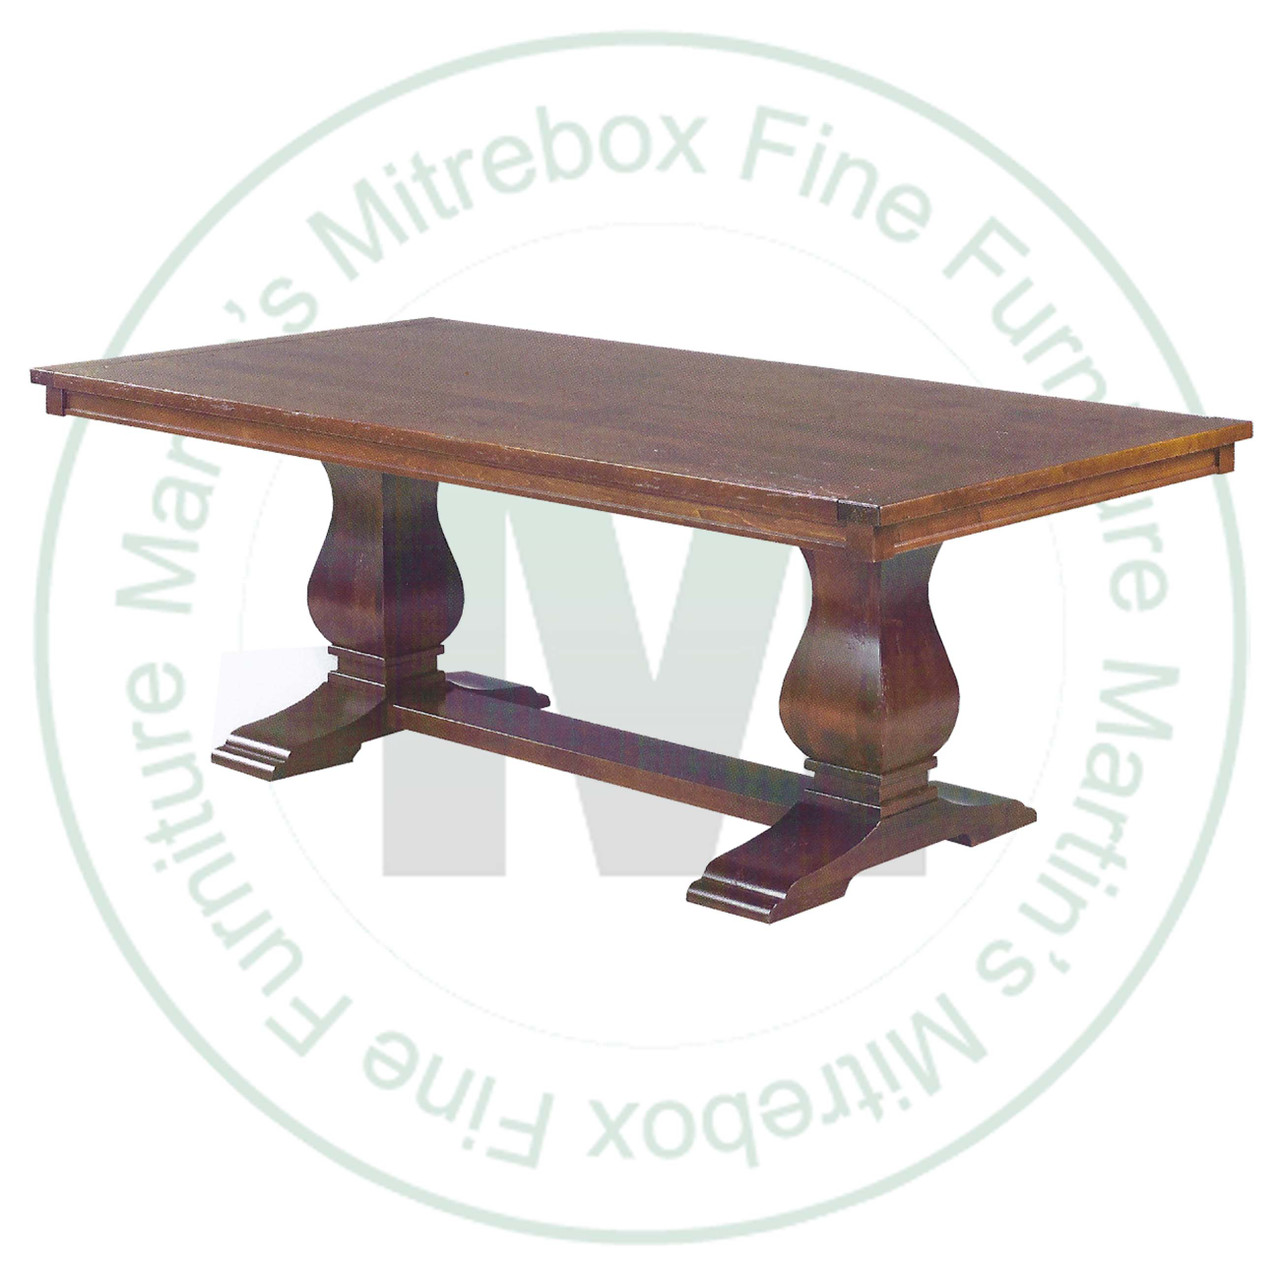 Wormy Maple Socrates Double Pedestal Table 54''D x 84''W x 30''H With 3 - 12'' Leaves. Table Has 1.25'' Thick Top